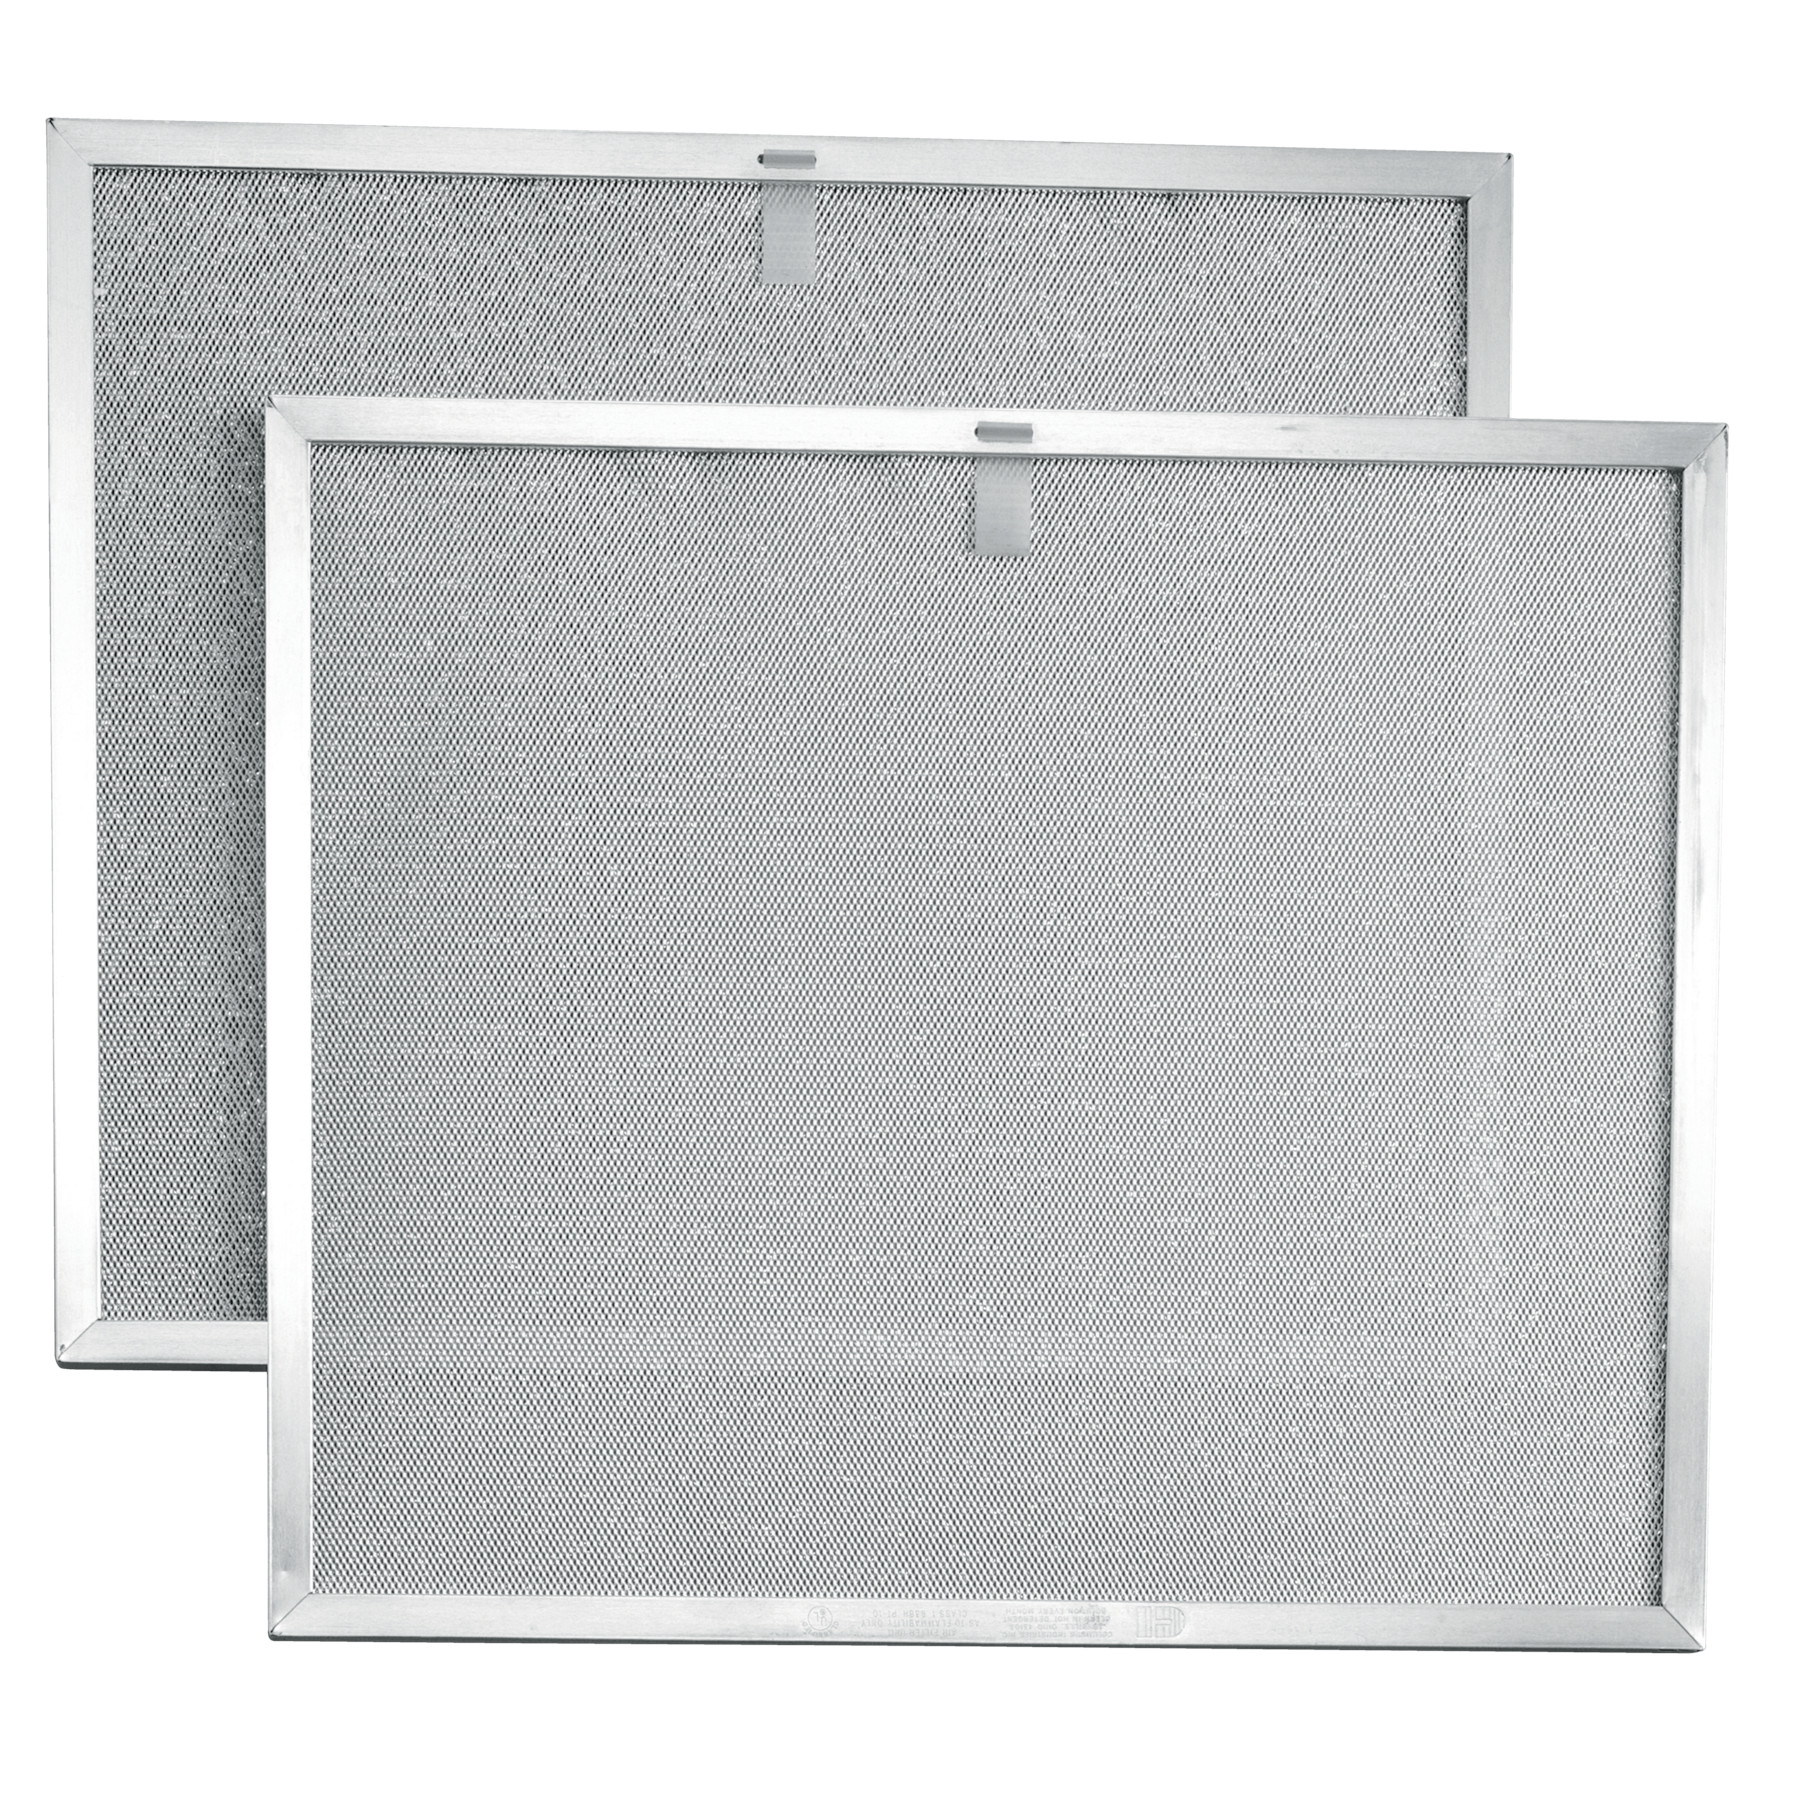 Broan-NuTone® Genuine Replacement Aluminum Filter for 30" wide Range Hoods, 14-3/8" X 11-7/8", Fits Select Models, (2-Pa